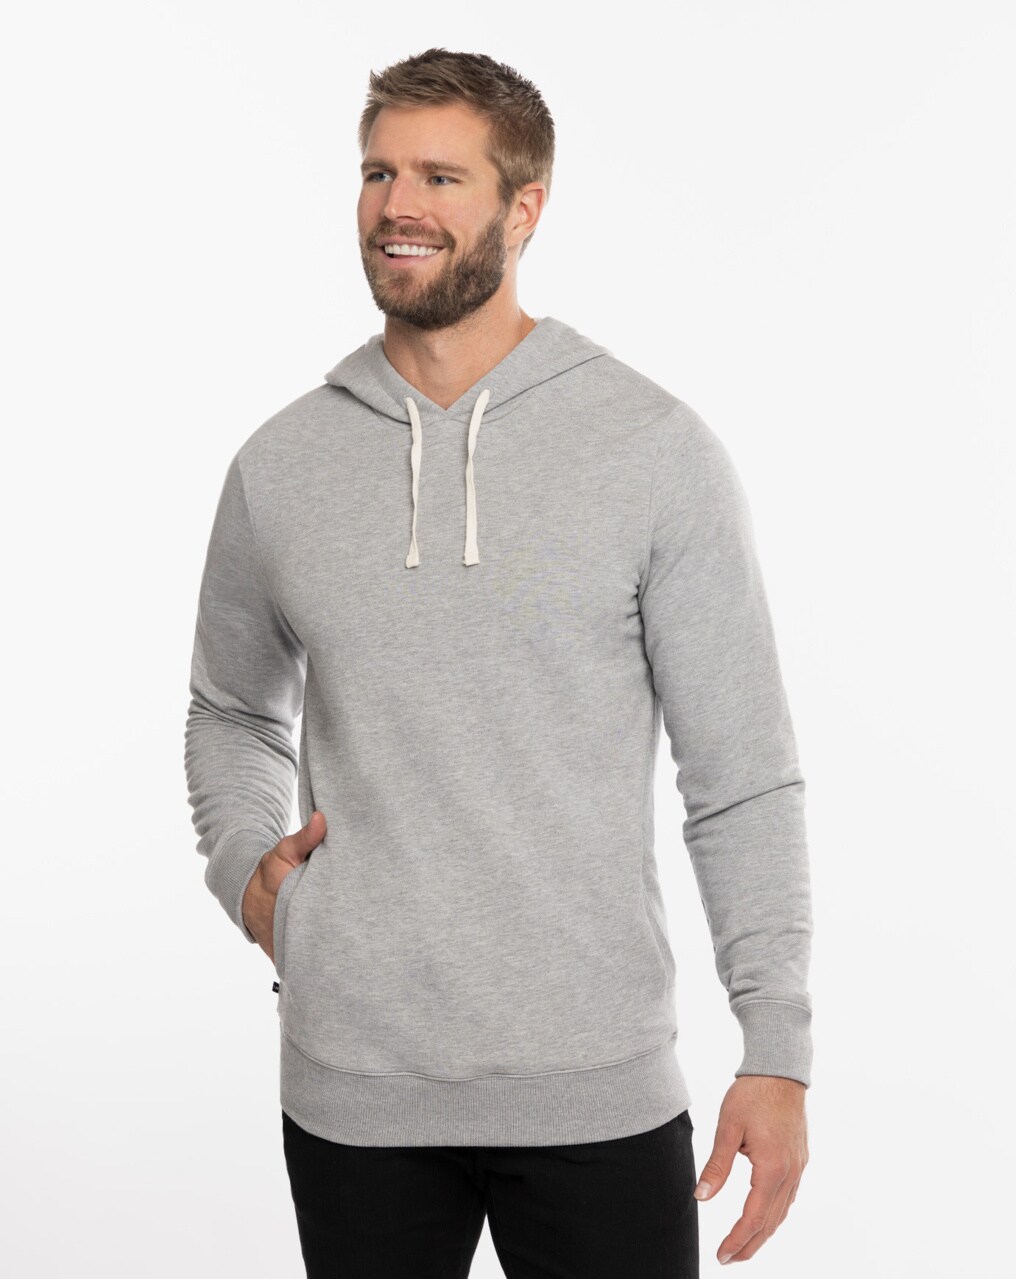 Pullover Hoodies  Quality Wholesale Sweatshirts at Clothing Authority